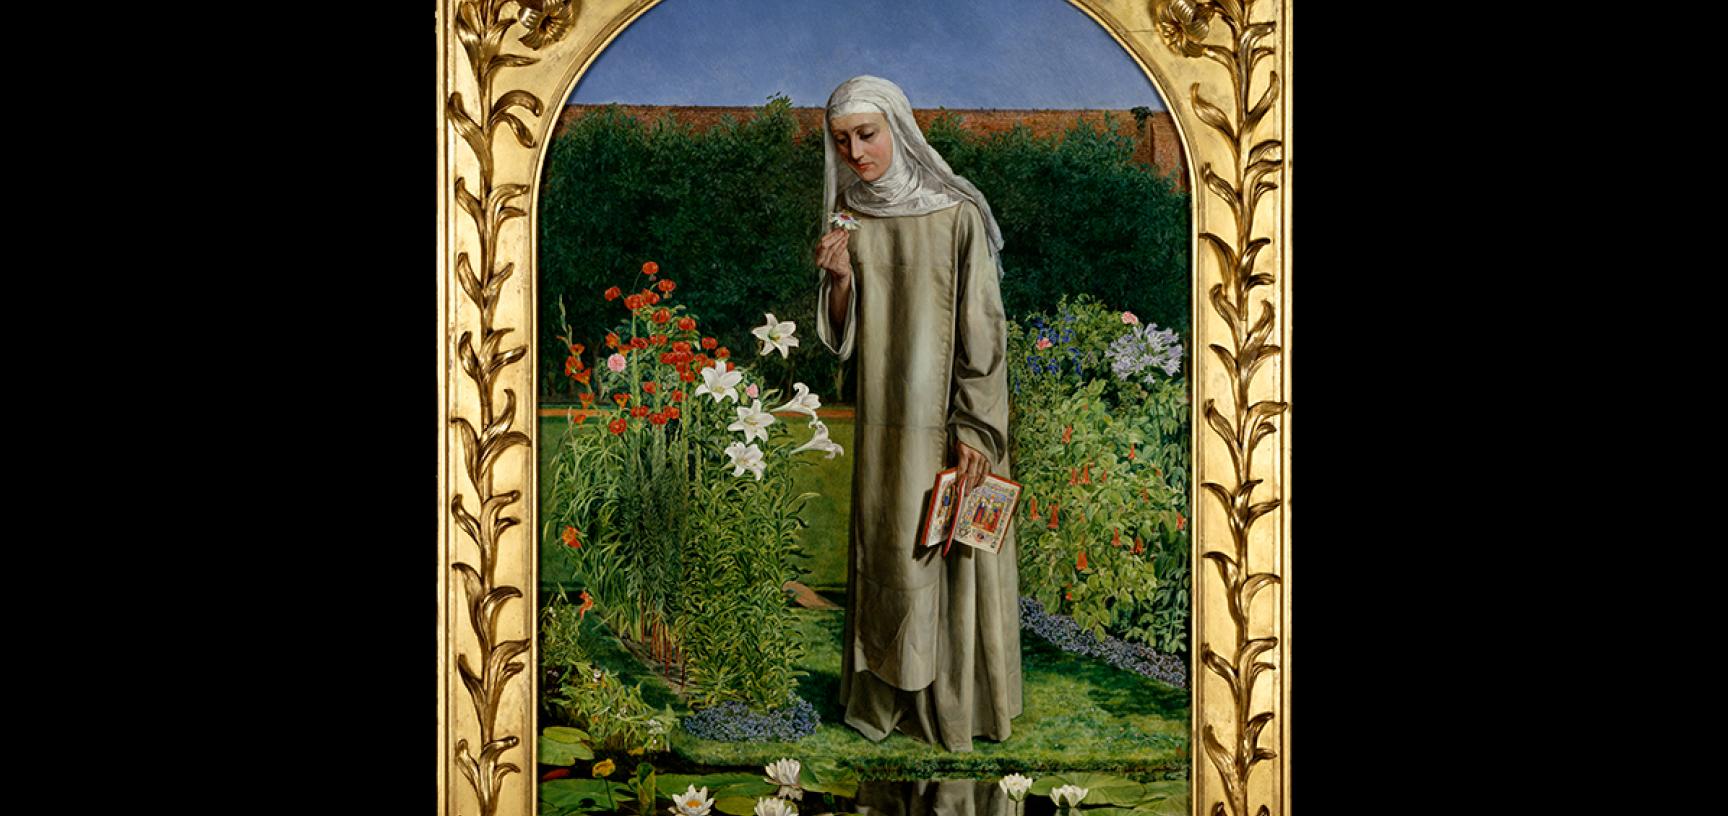 Charles Allston Collins, Convent Thoughts 